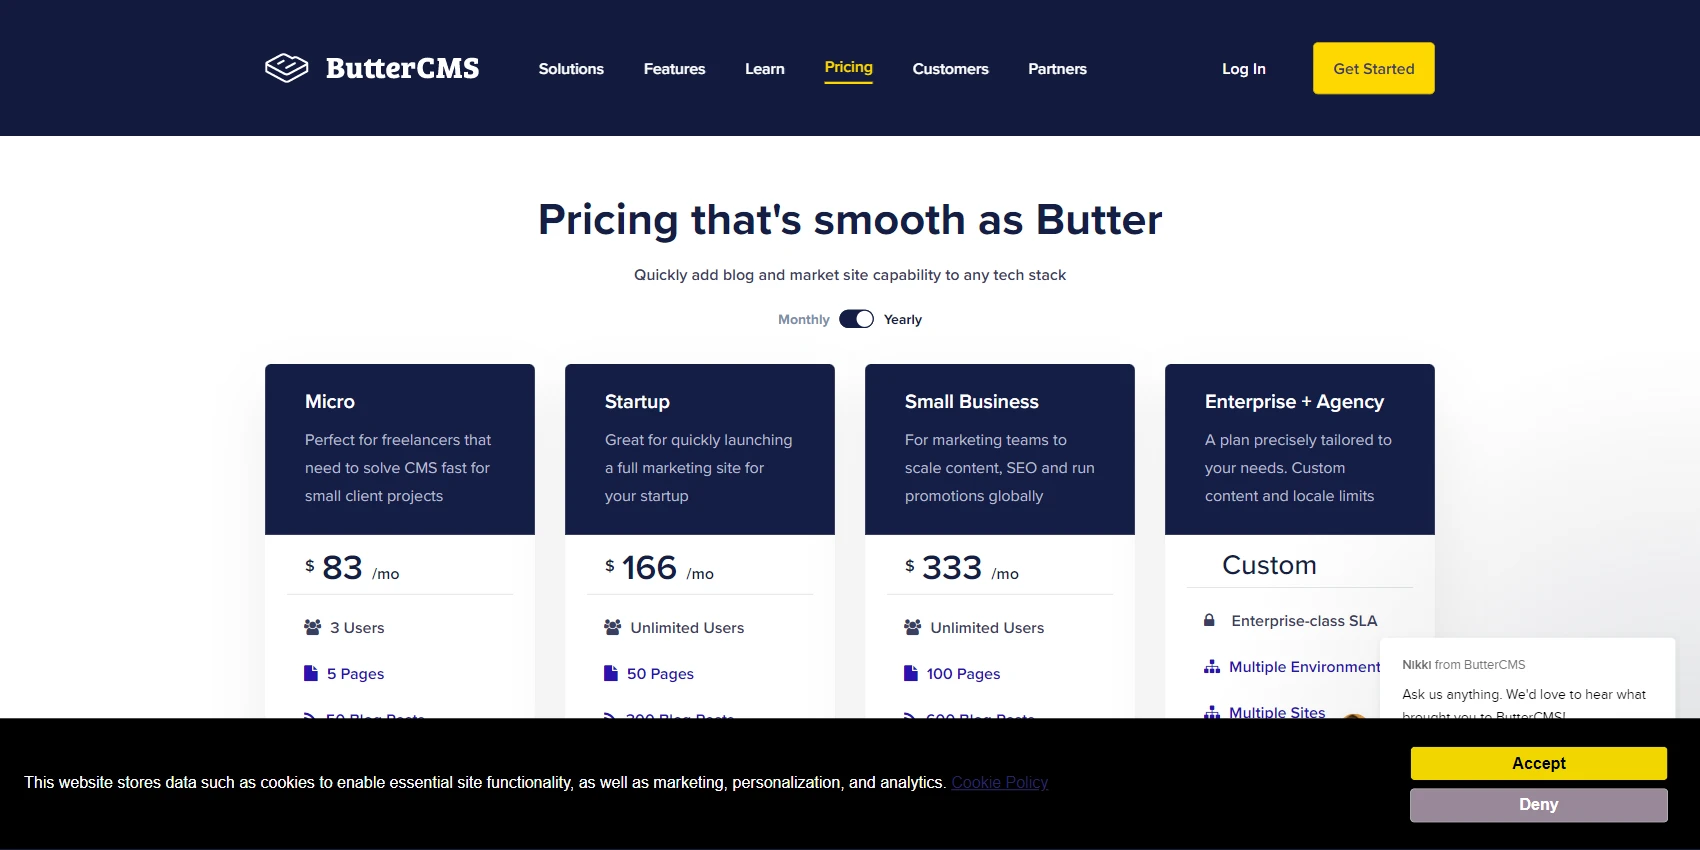 5. Butter CMS Pricing